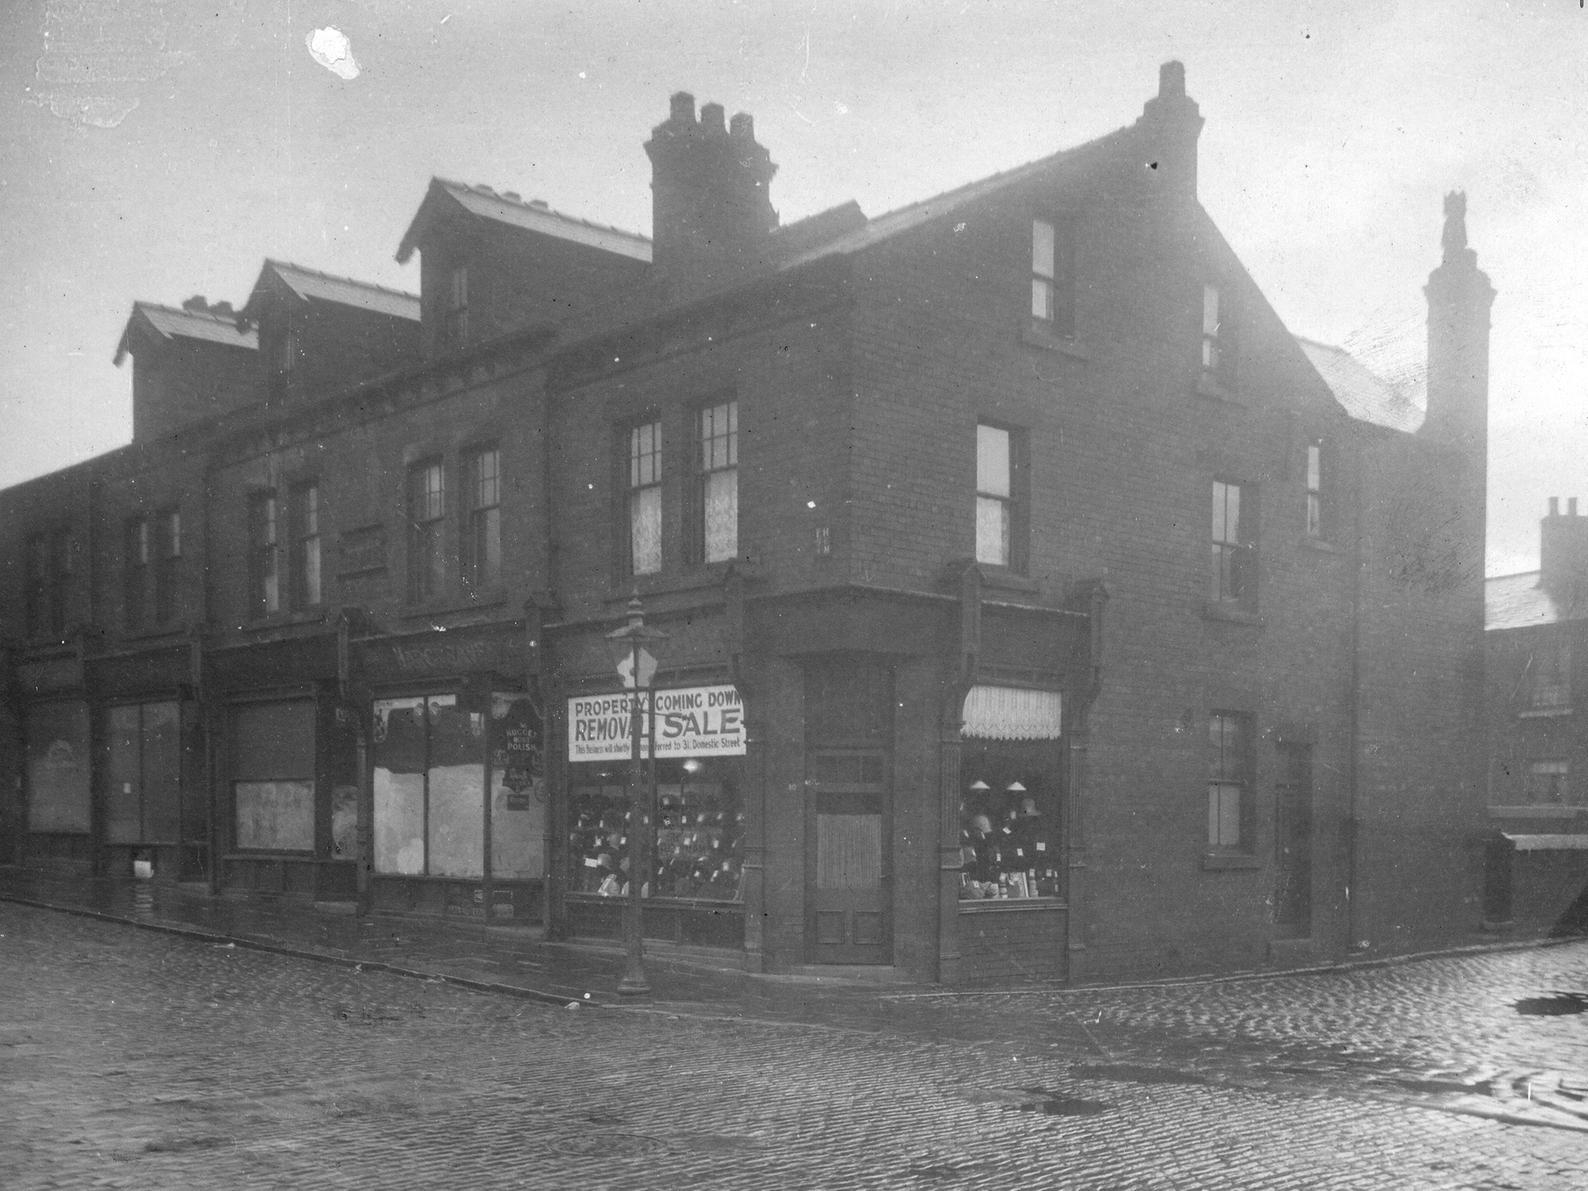 Parade of shops on Domestic Street in Holbeck. To the right is Mann Place and then number 10 Domestic Street is Miss Eliza Eastwood, milliner.